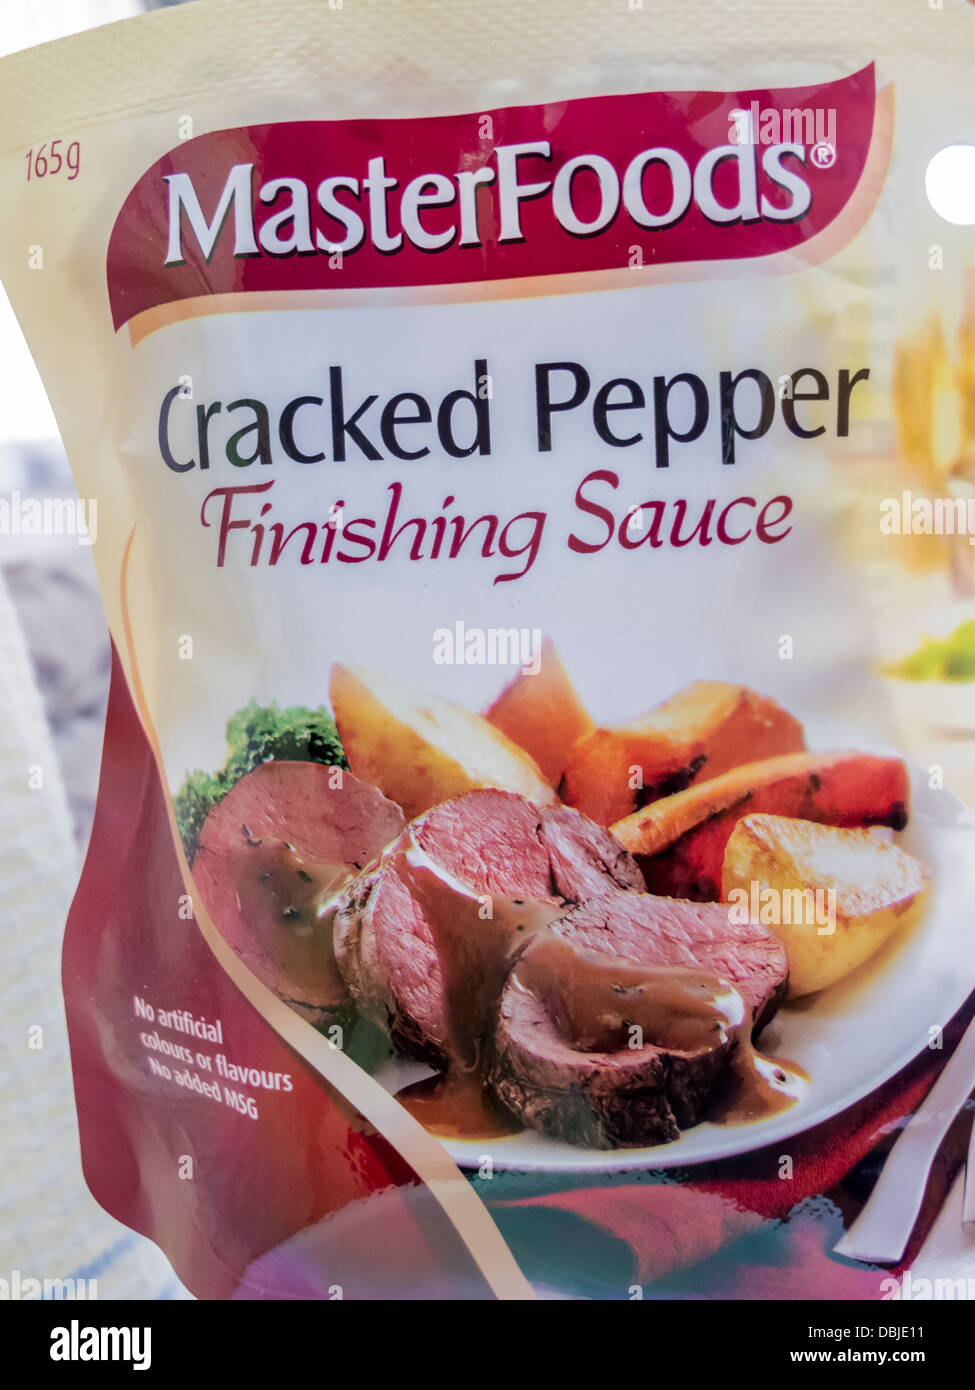 MasterFoods Cracked Pepper Finishing Sauce product closeup Stock